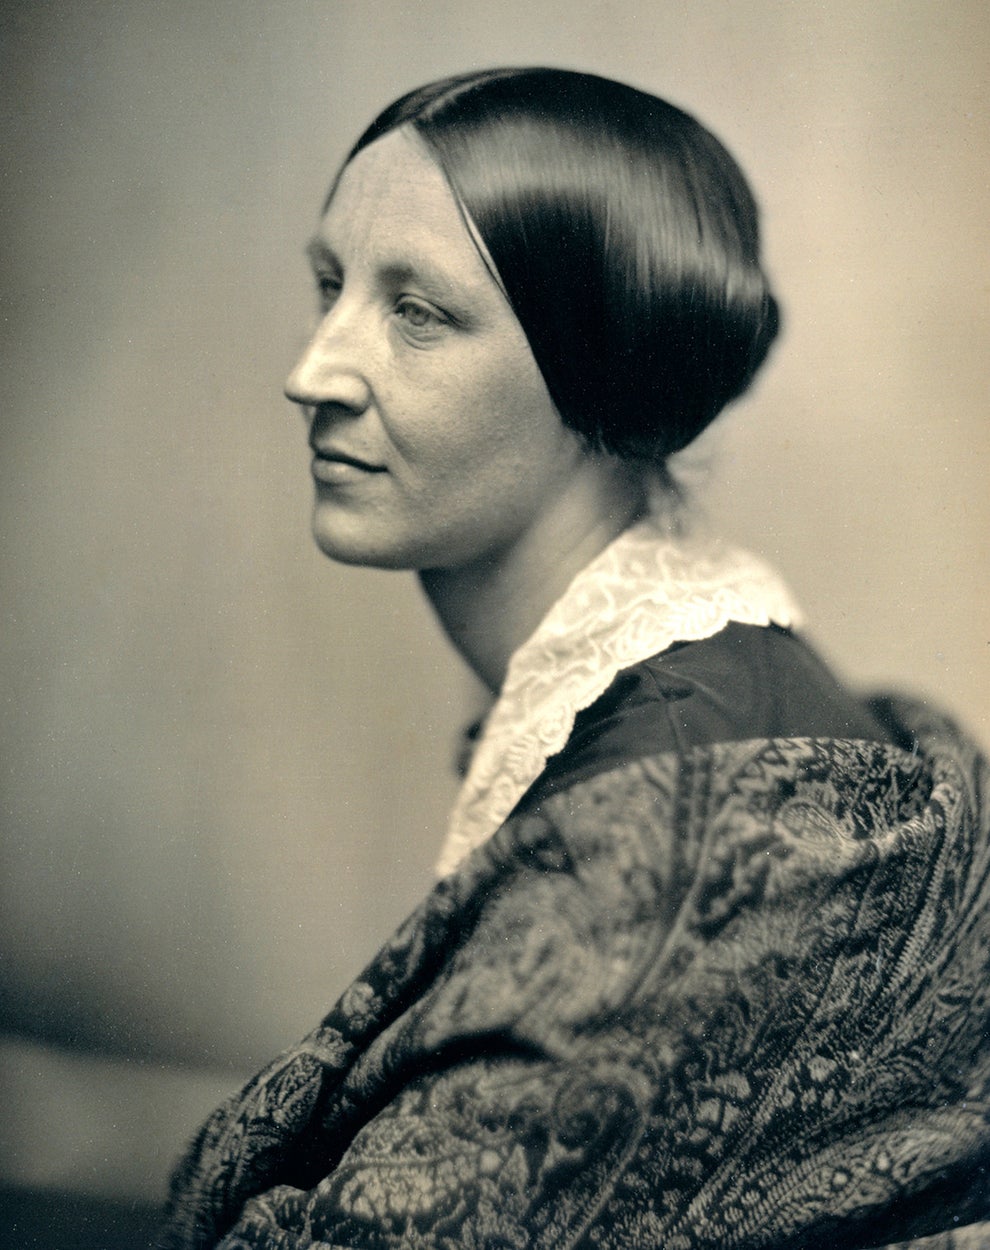 Susan B. Anthony, crusader for the women's suffrage movement.